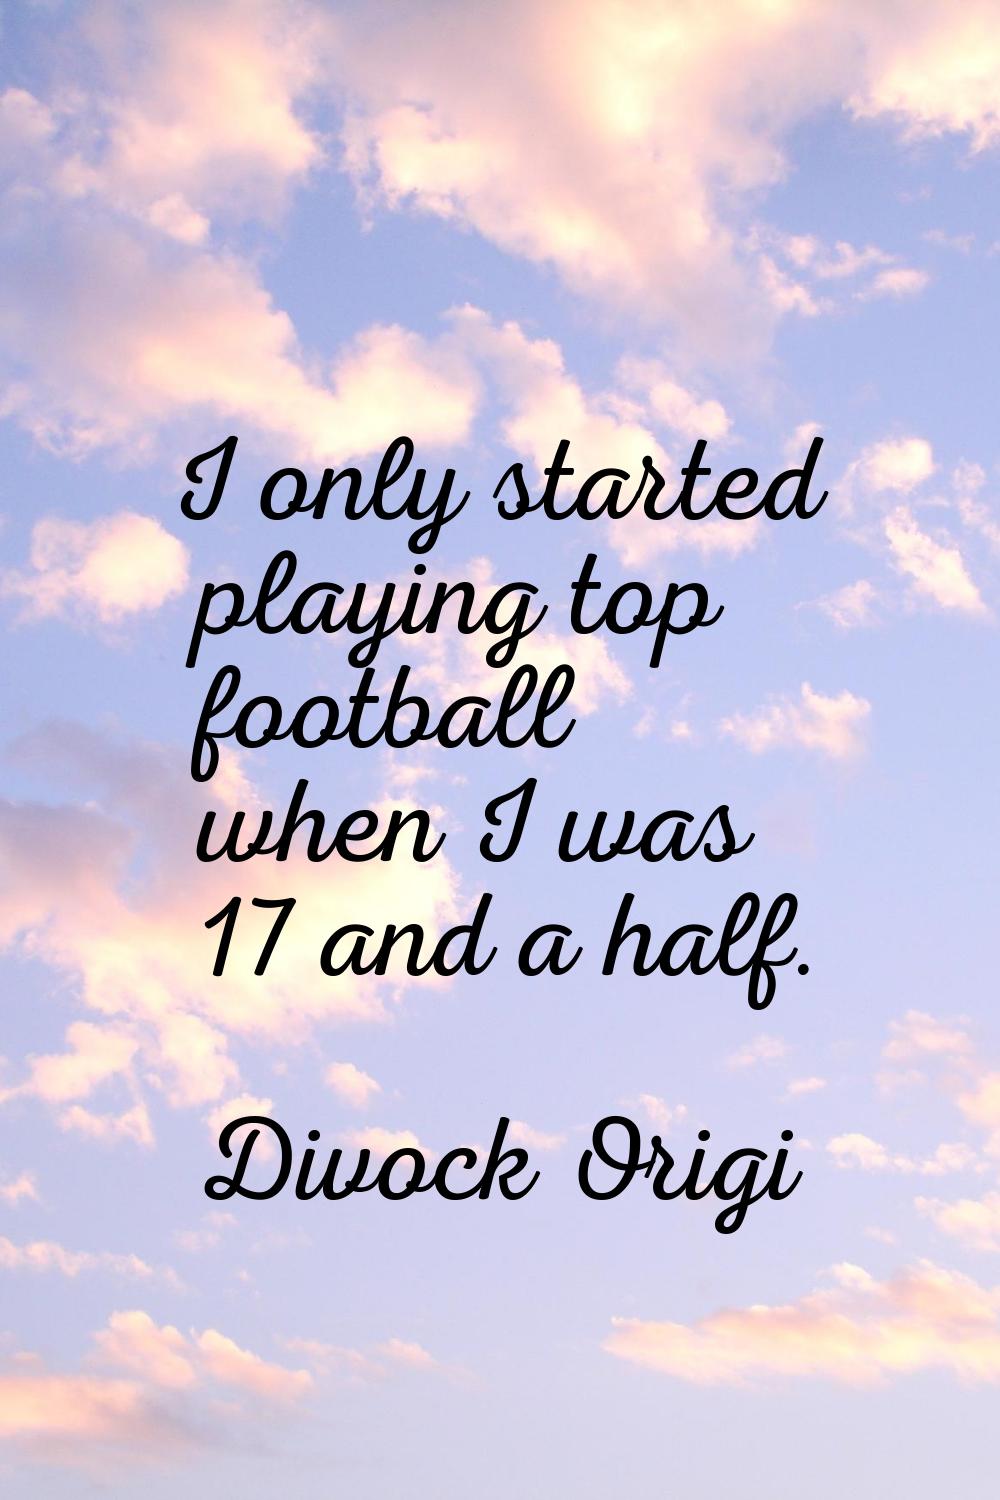 I only started playing top football when I was 17 and a half.